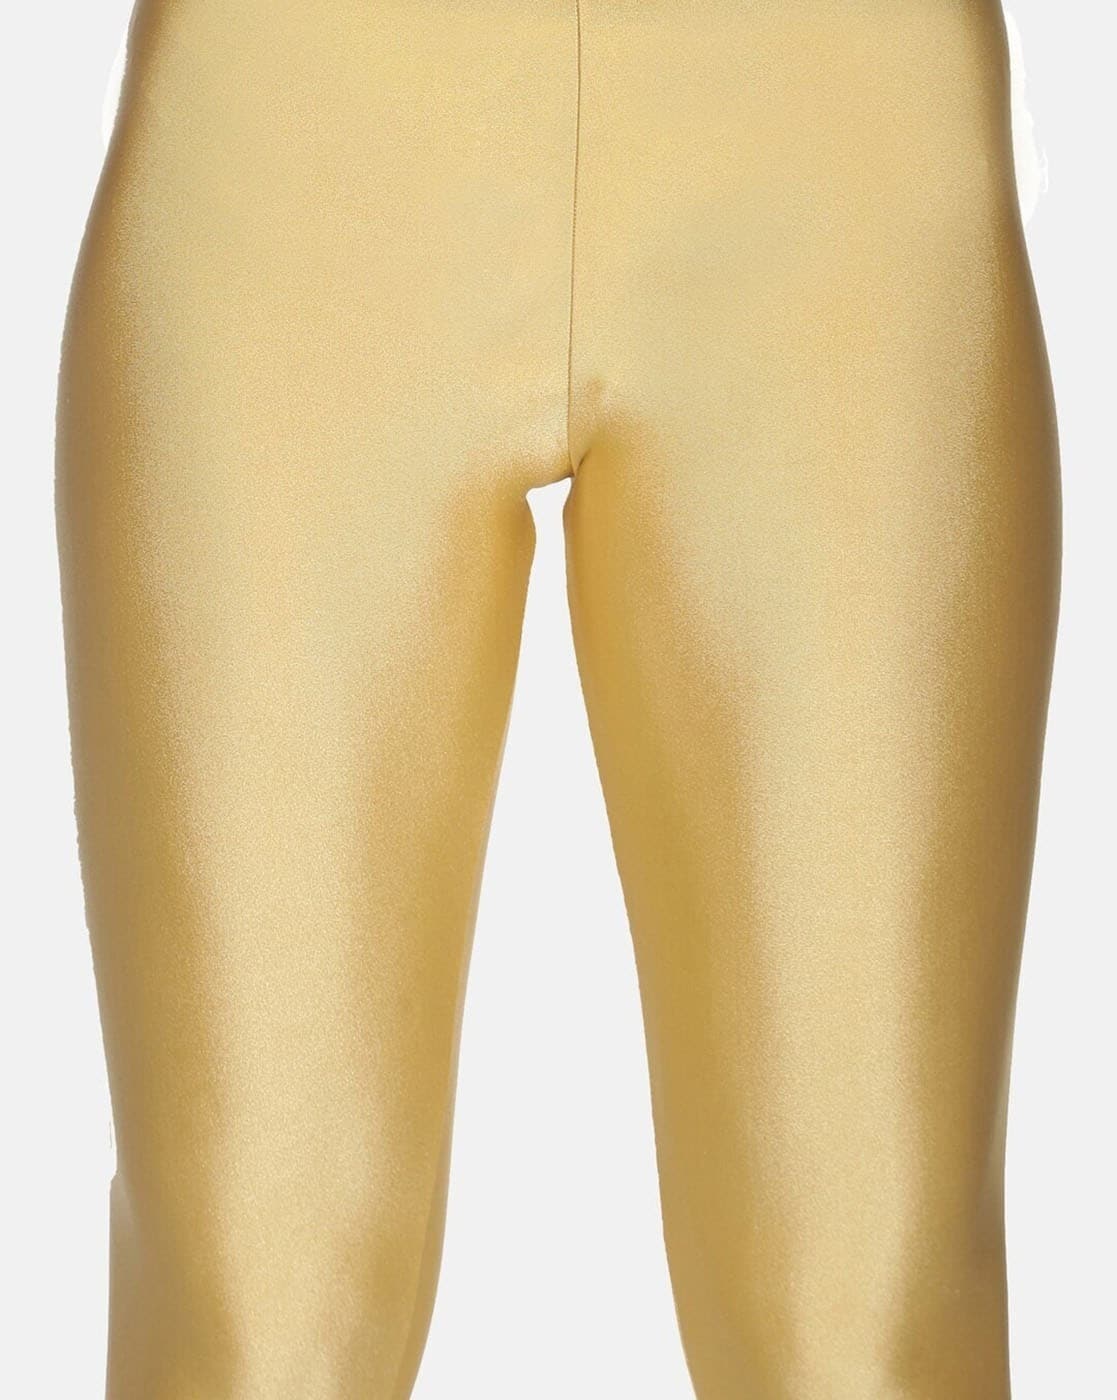 Twin Birds Women's Shimmer Legging - Radiant Series - No Marks Elastic Band  - Snug fit Comfortable Active Wear S - 2XL, Milky Way, L: Buy Online at  Best Price in UAE 